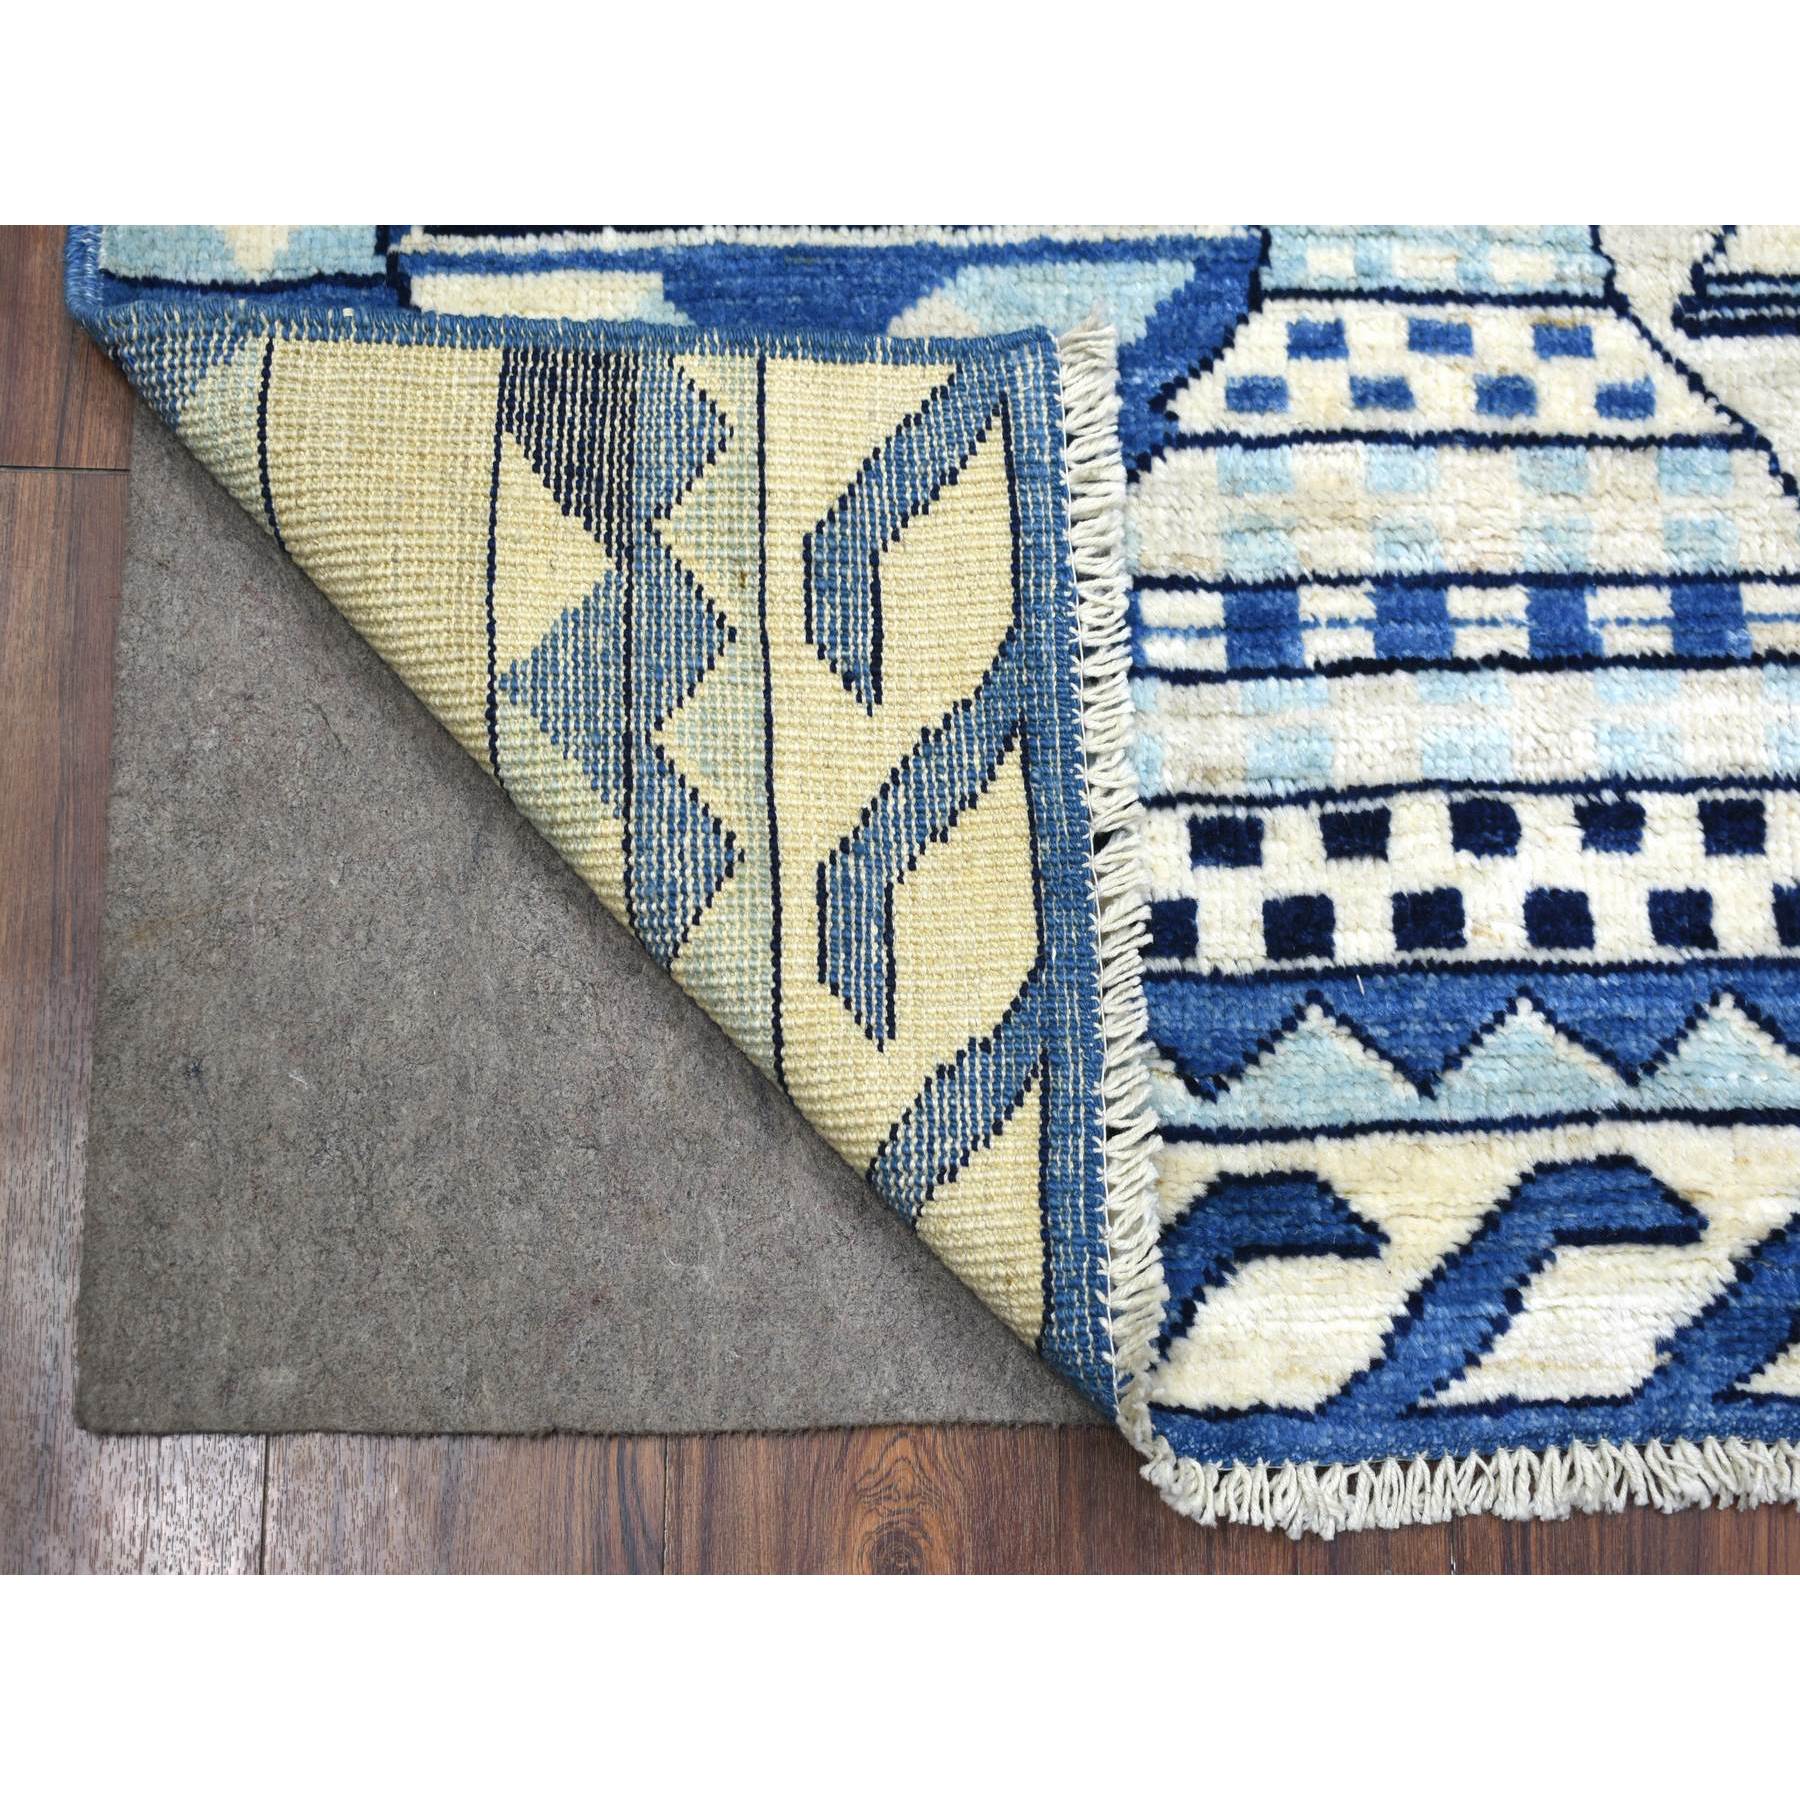 4'x6' Denim Blue, Hand Woven Anatolian Village Inspired with Little Triangles Design, Natural Dyes Soft Wool, Oriental Rug 